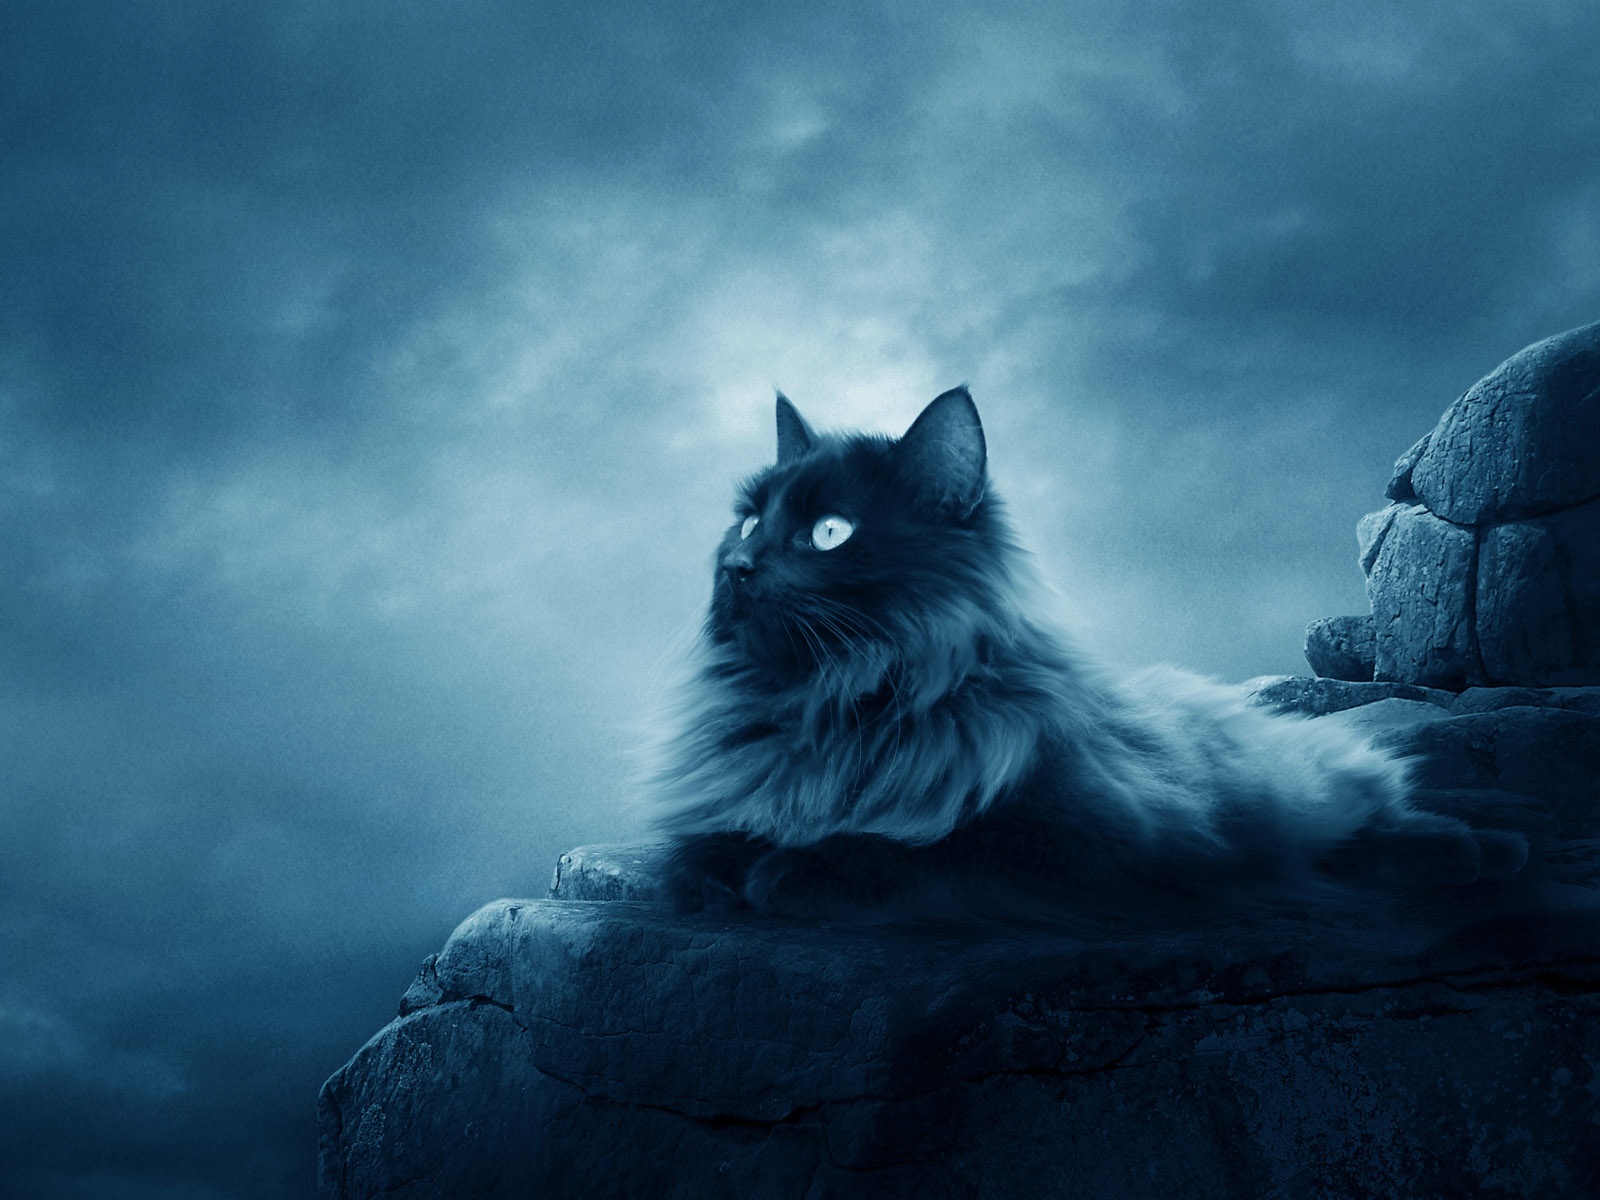 Full Moon Cat Wallpapers in jpg format for free download